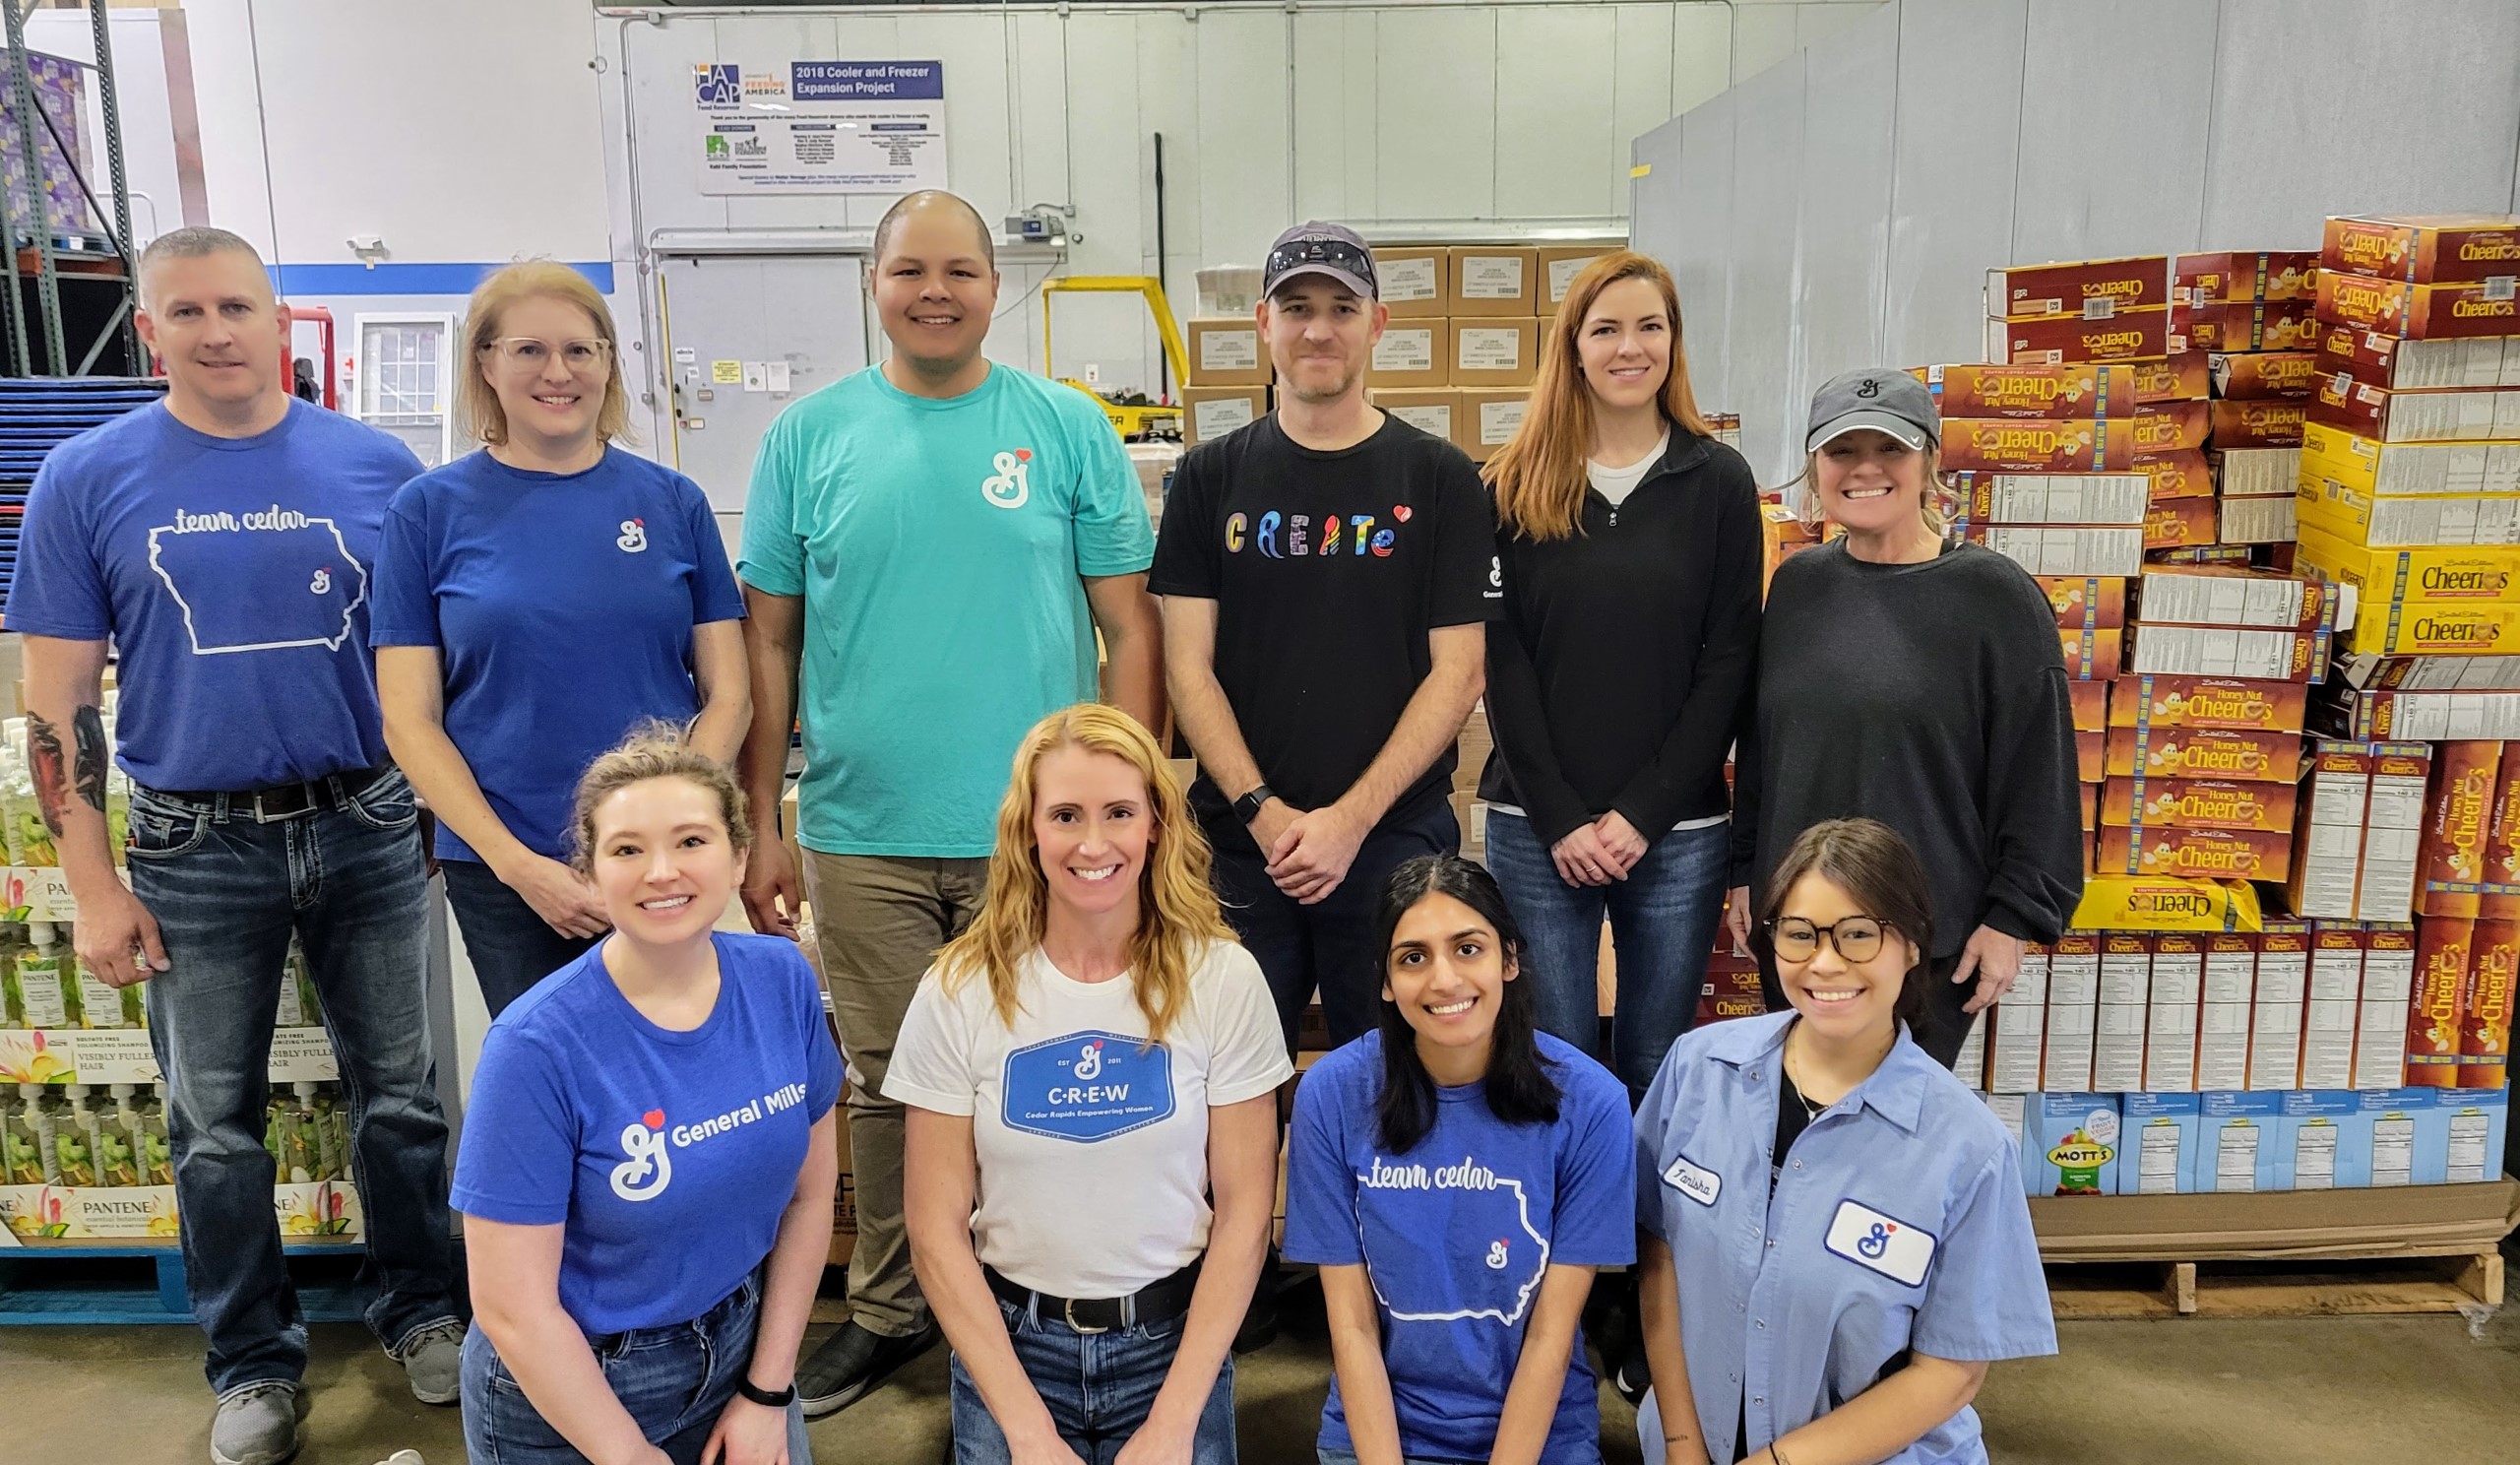 Employees volunteering from a General Mills manufacuturing facility